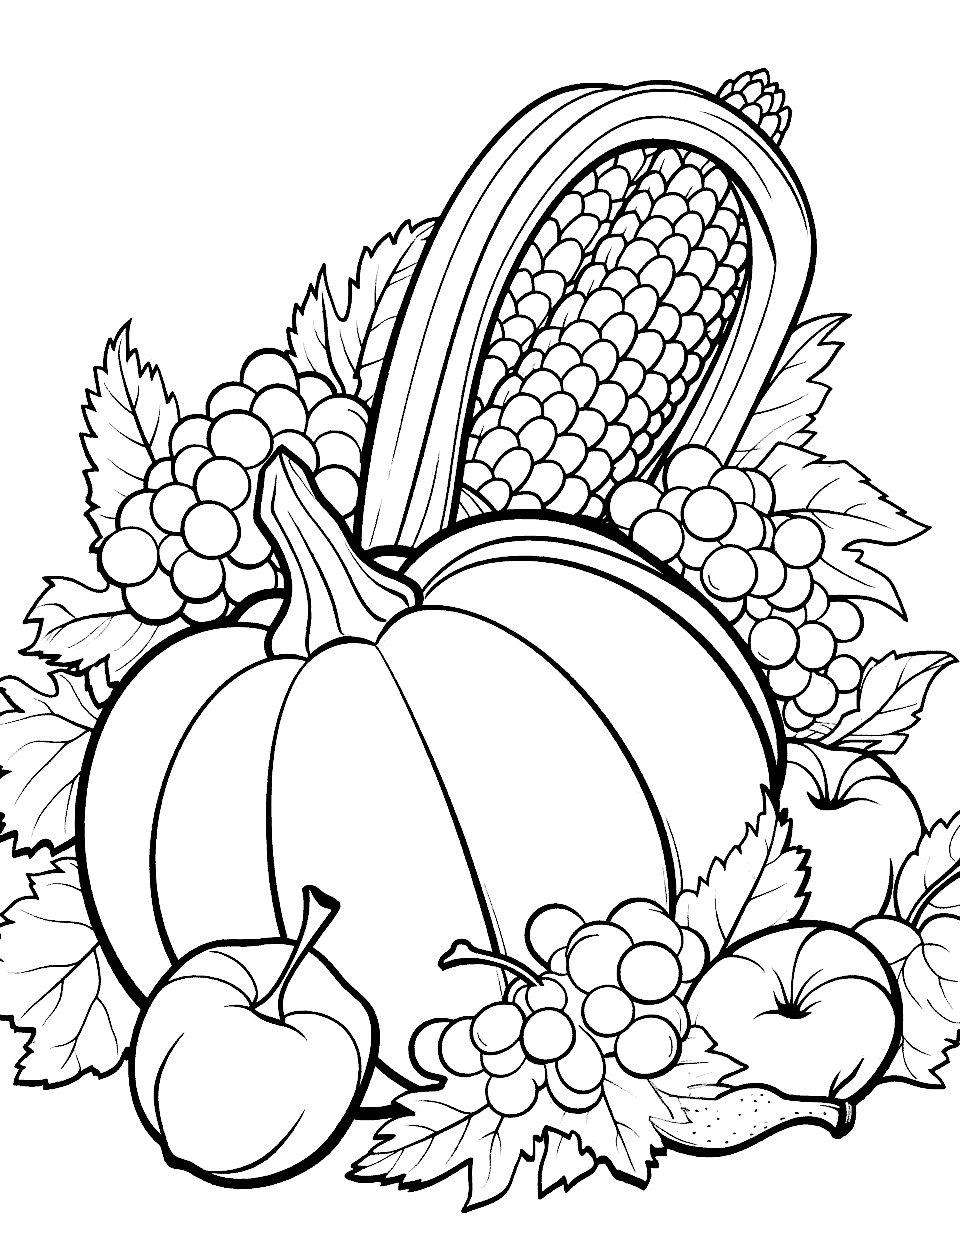 Detailed Cornucopia Thanksgiving Coloring Page - A cornucopia with various fruits, vegetables, and fall elements for older kids.